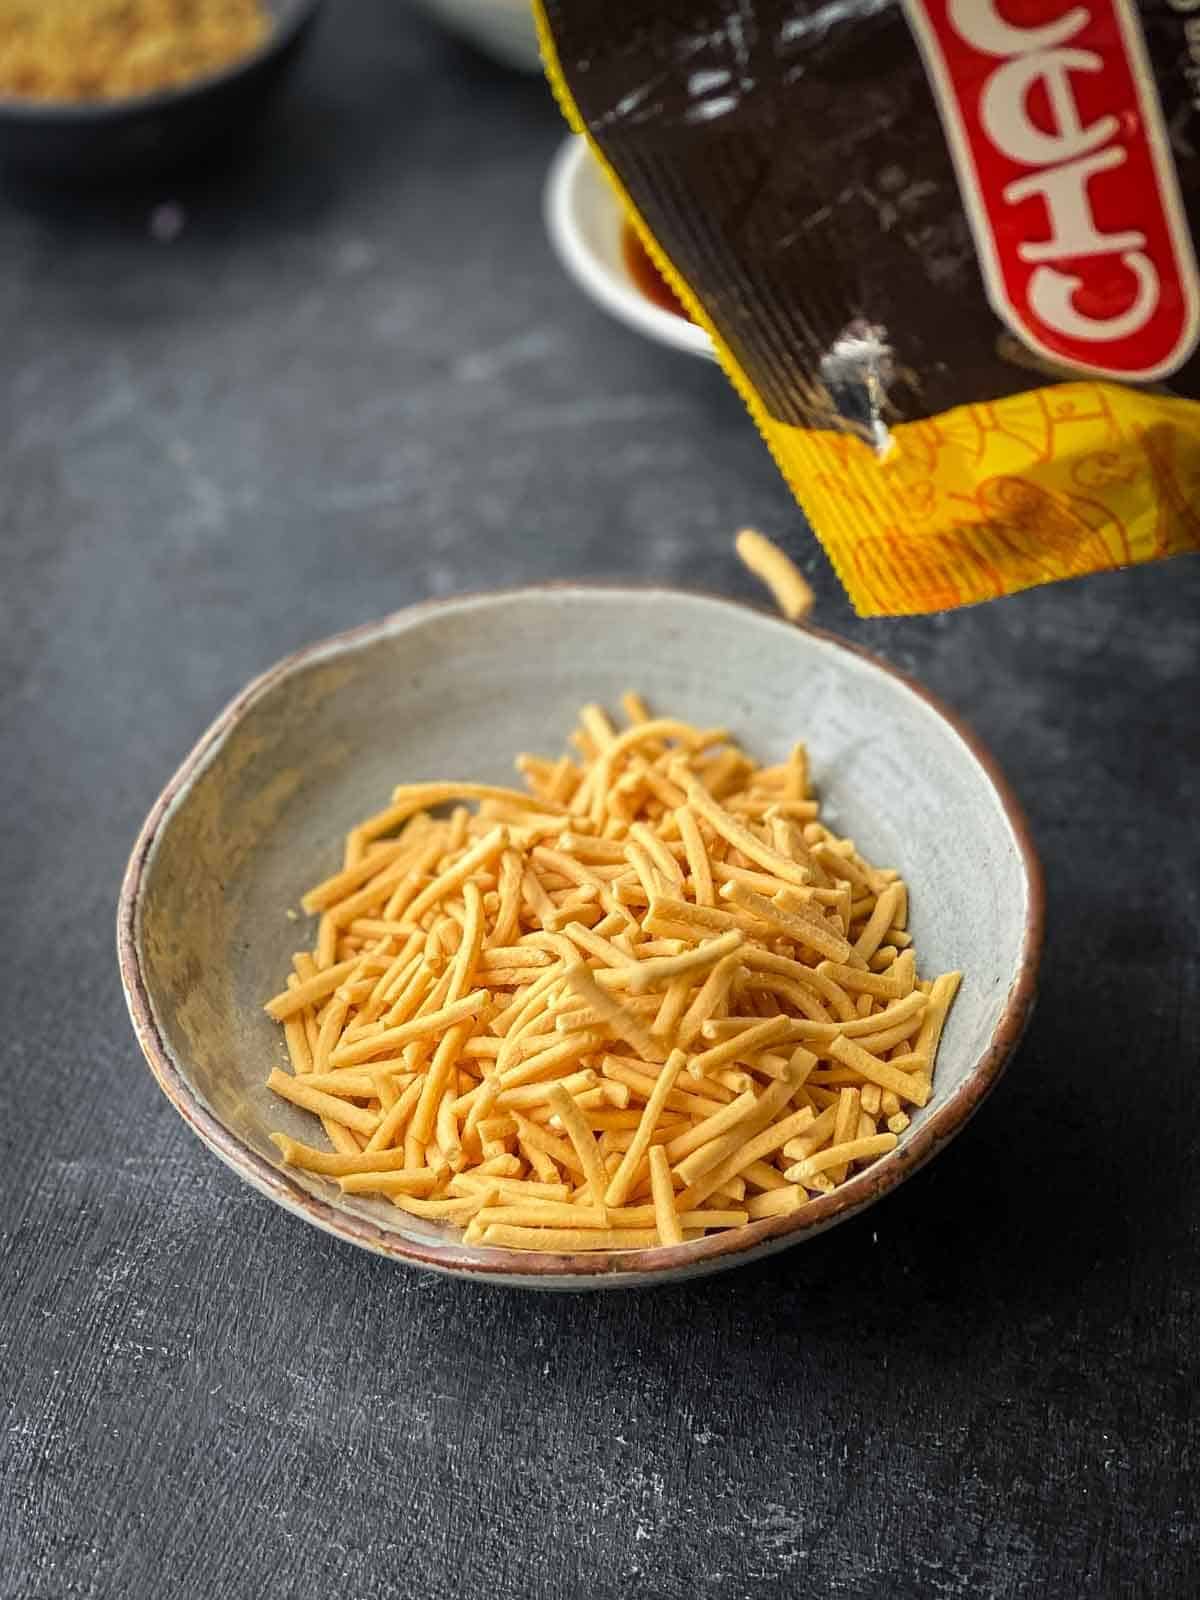 crispy fried noodles being poured out of packet into a small bowl